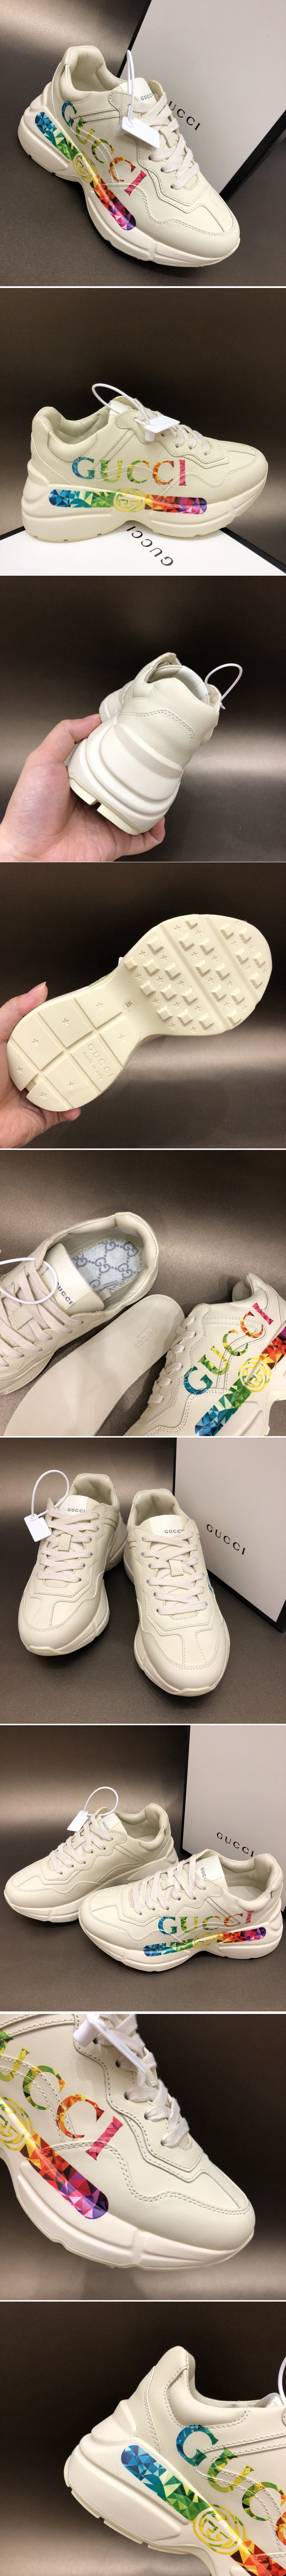 Replica Women and Men Gucci Rhyton leather sneaker with Gucci logo in White Leather